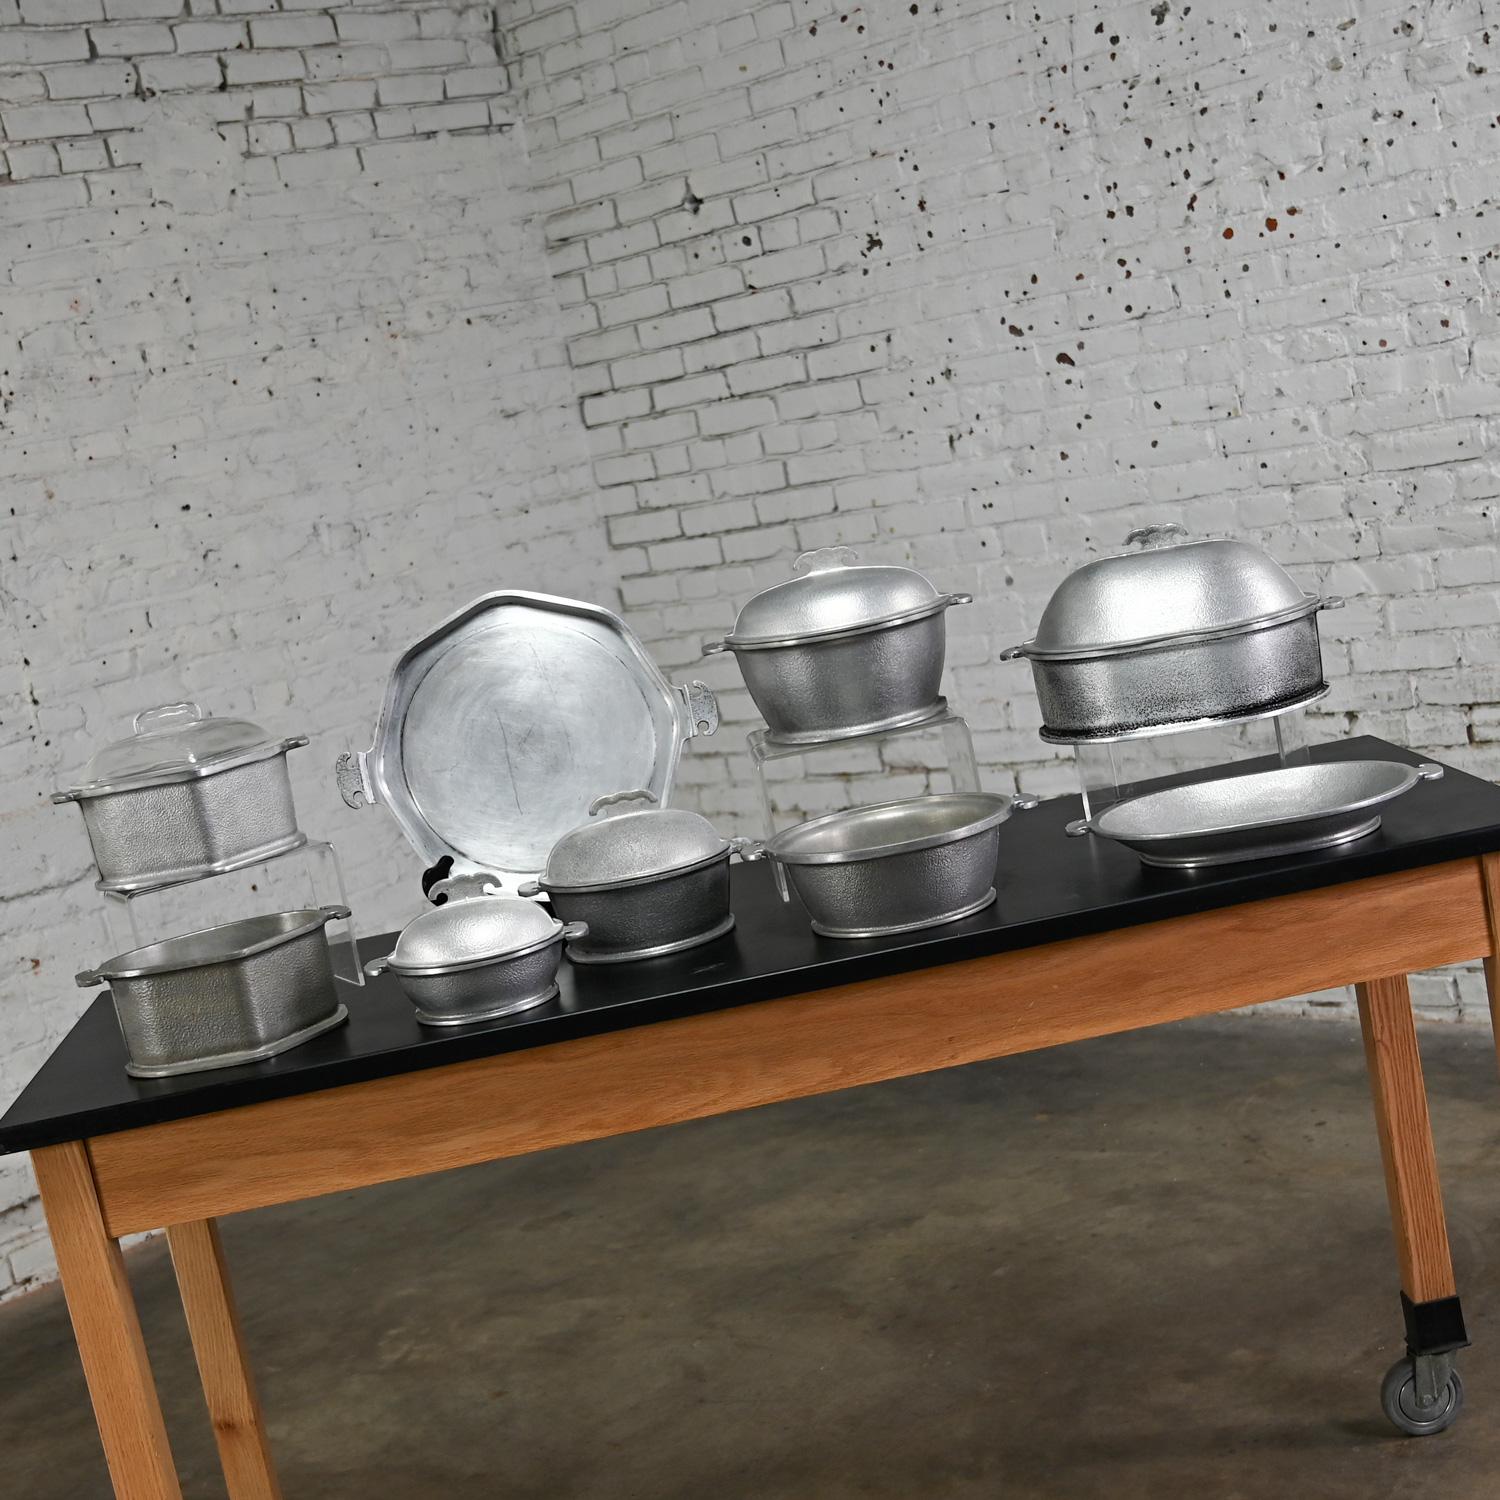 Incredible Mid-20th Century Guardian Service dual purpose 14-piece cookware set including 7 pots, 2 trays, and 5 interchangeable lids. Beautiful condition, keeping in mind that these are vintage and not new so will have signs of use and wear. The